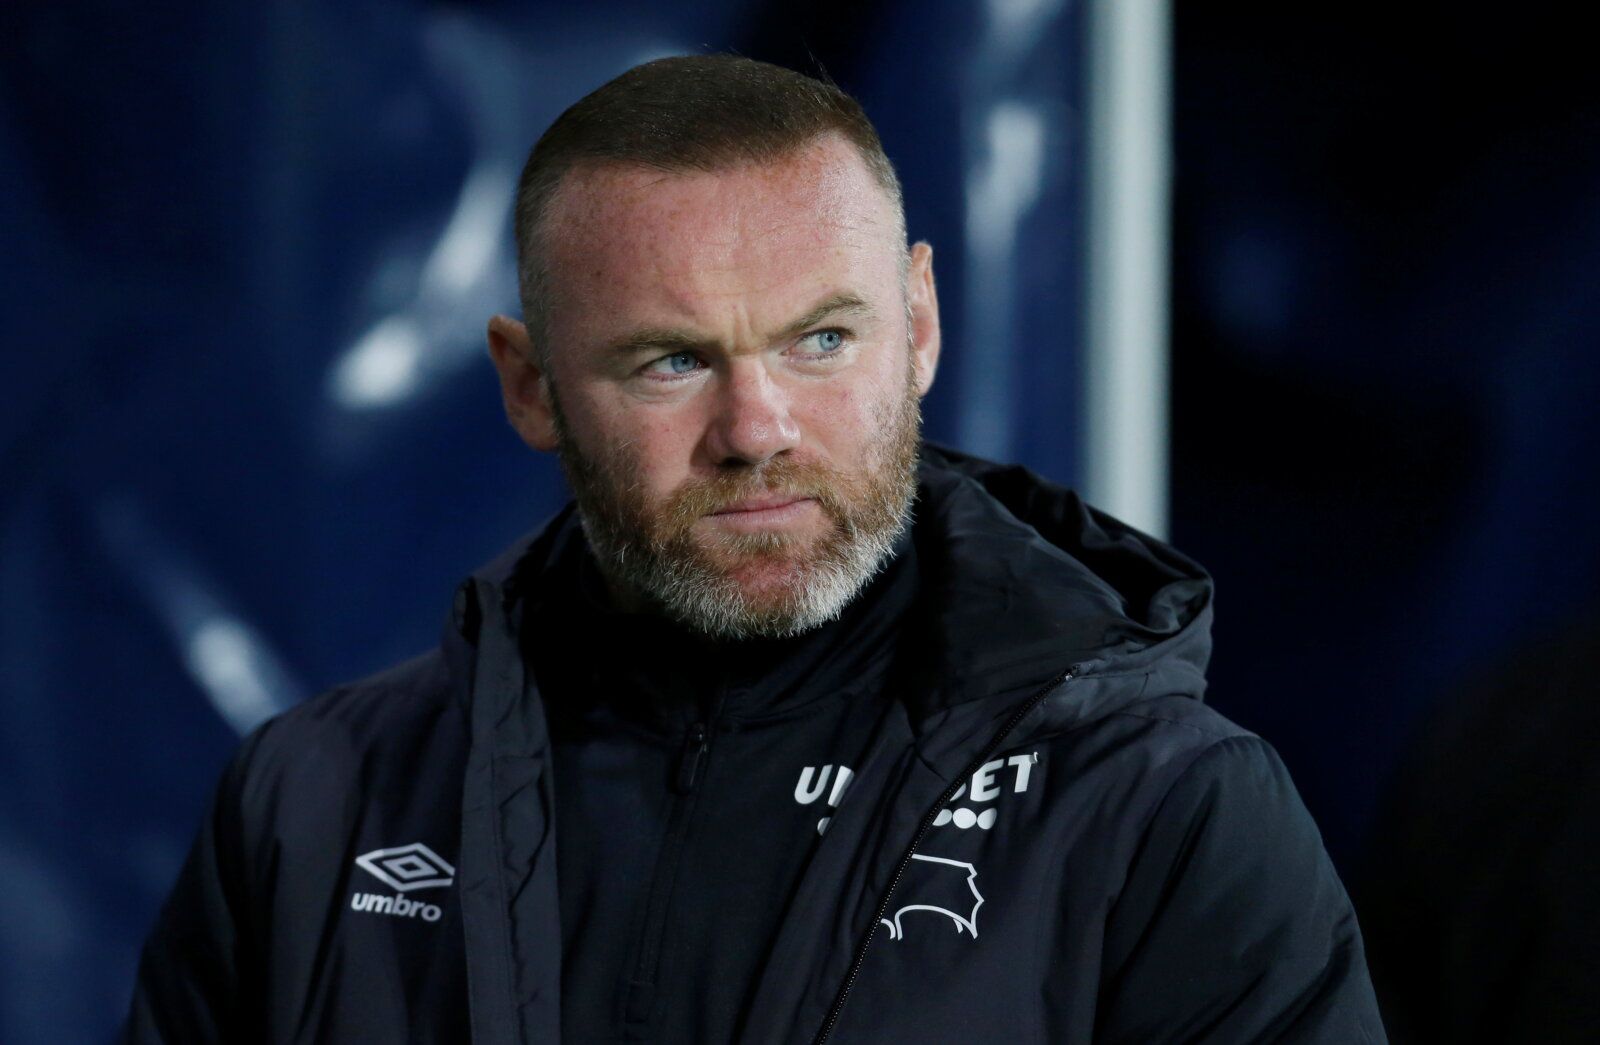 Soccer Football - Championship - West Bromwich Albion v Derby County - The Hawthorns, West Bromwich, Britain - September 14, 2021  Derby County manager Wayne Rooney Action Images/Ed Sykes